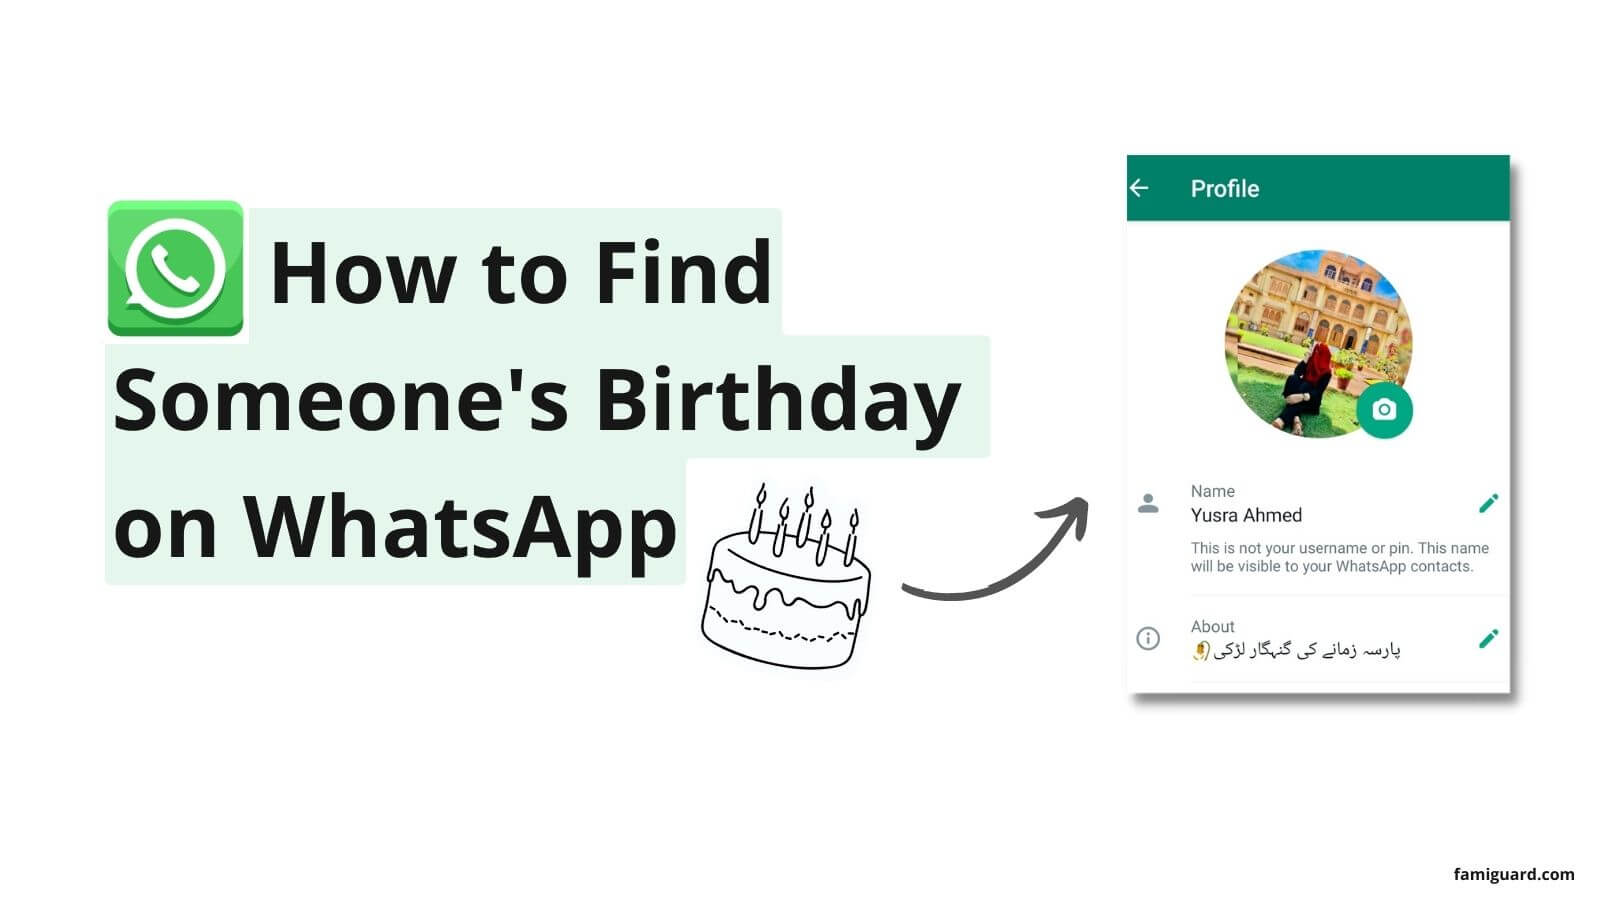 How to find someone's birthday on WhatsApp